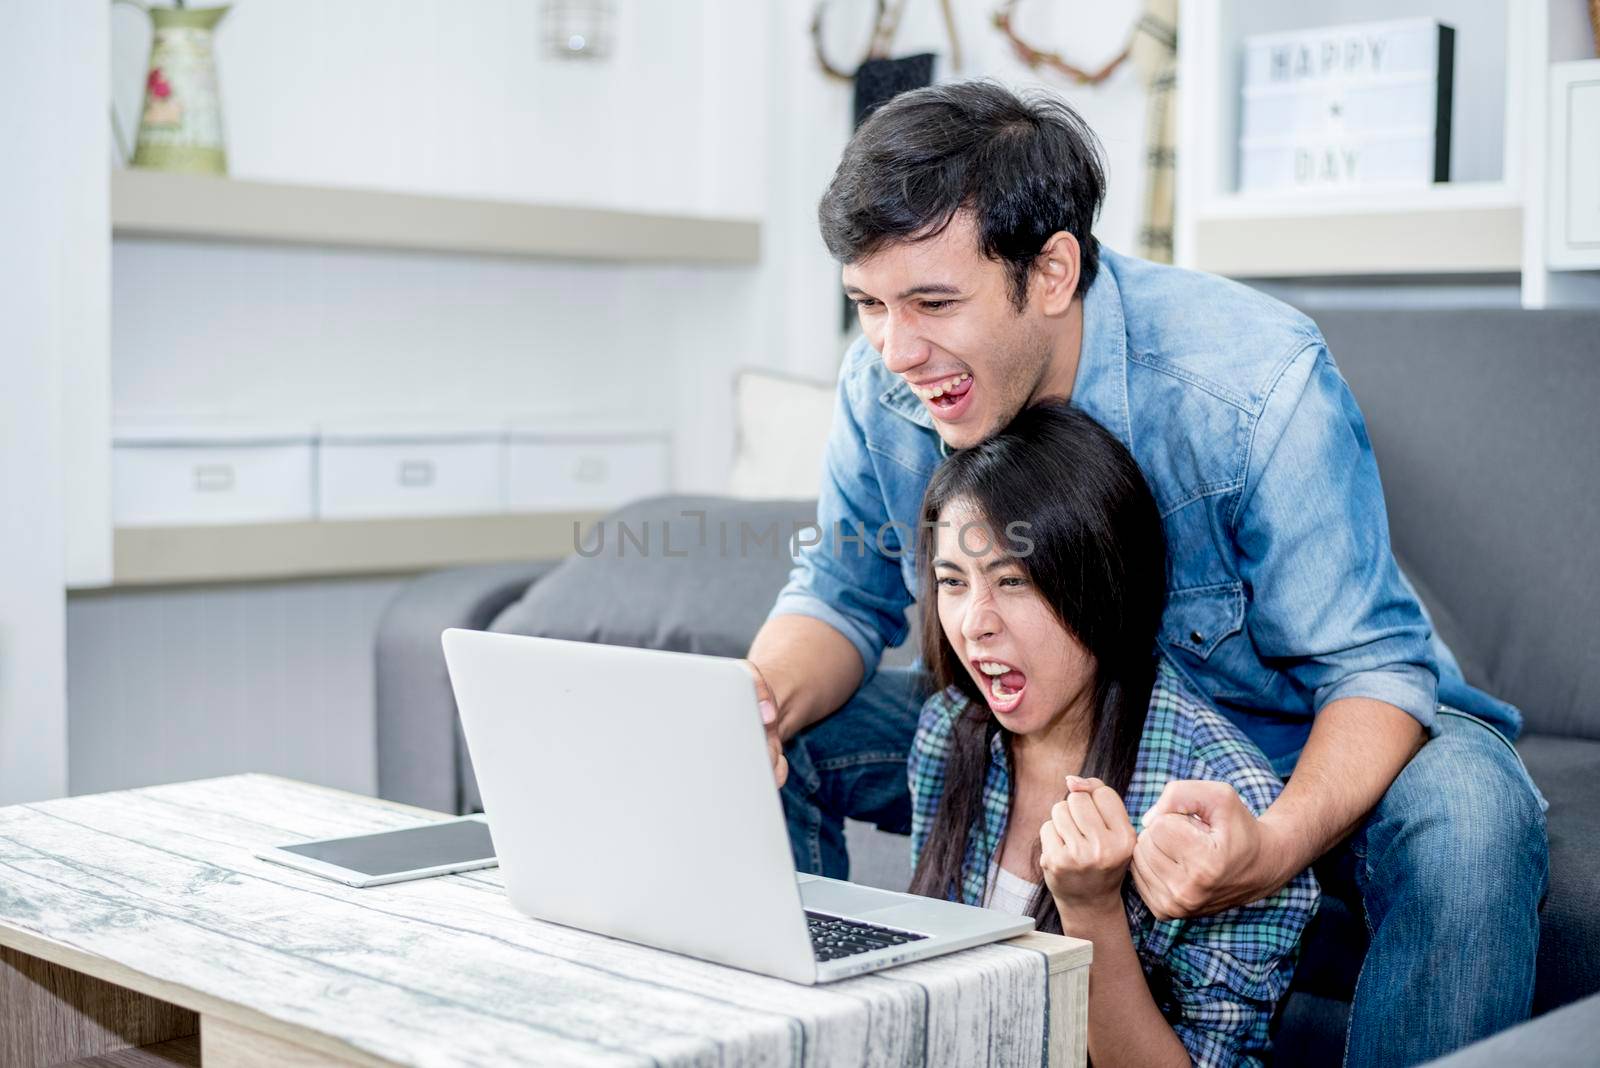 Lover are surprising when using the laptop. Family concept, Lovers concept, Technology concept